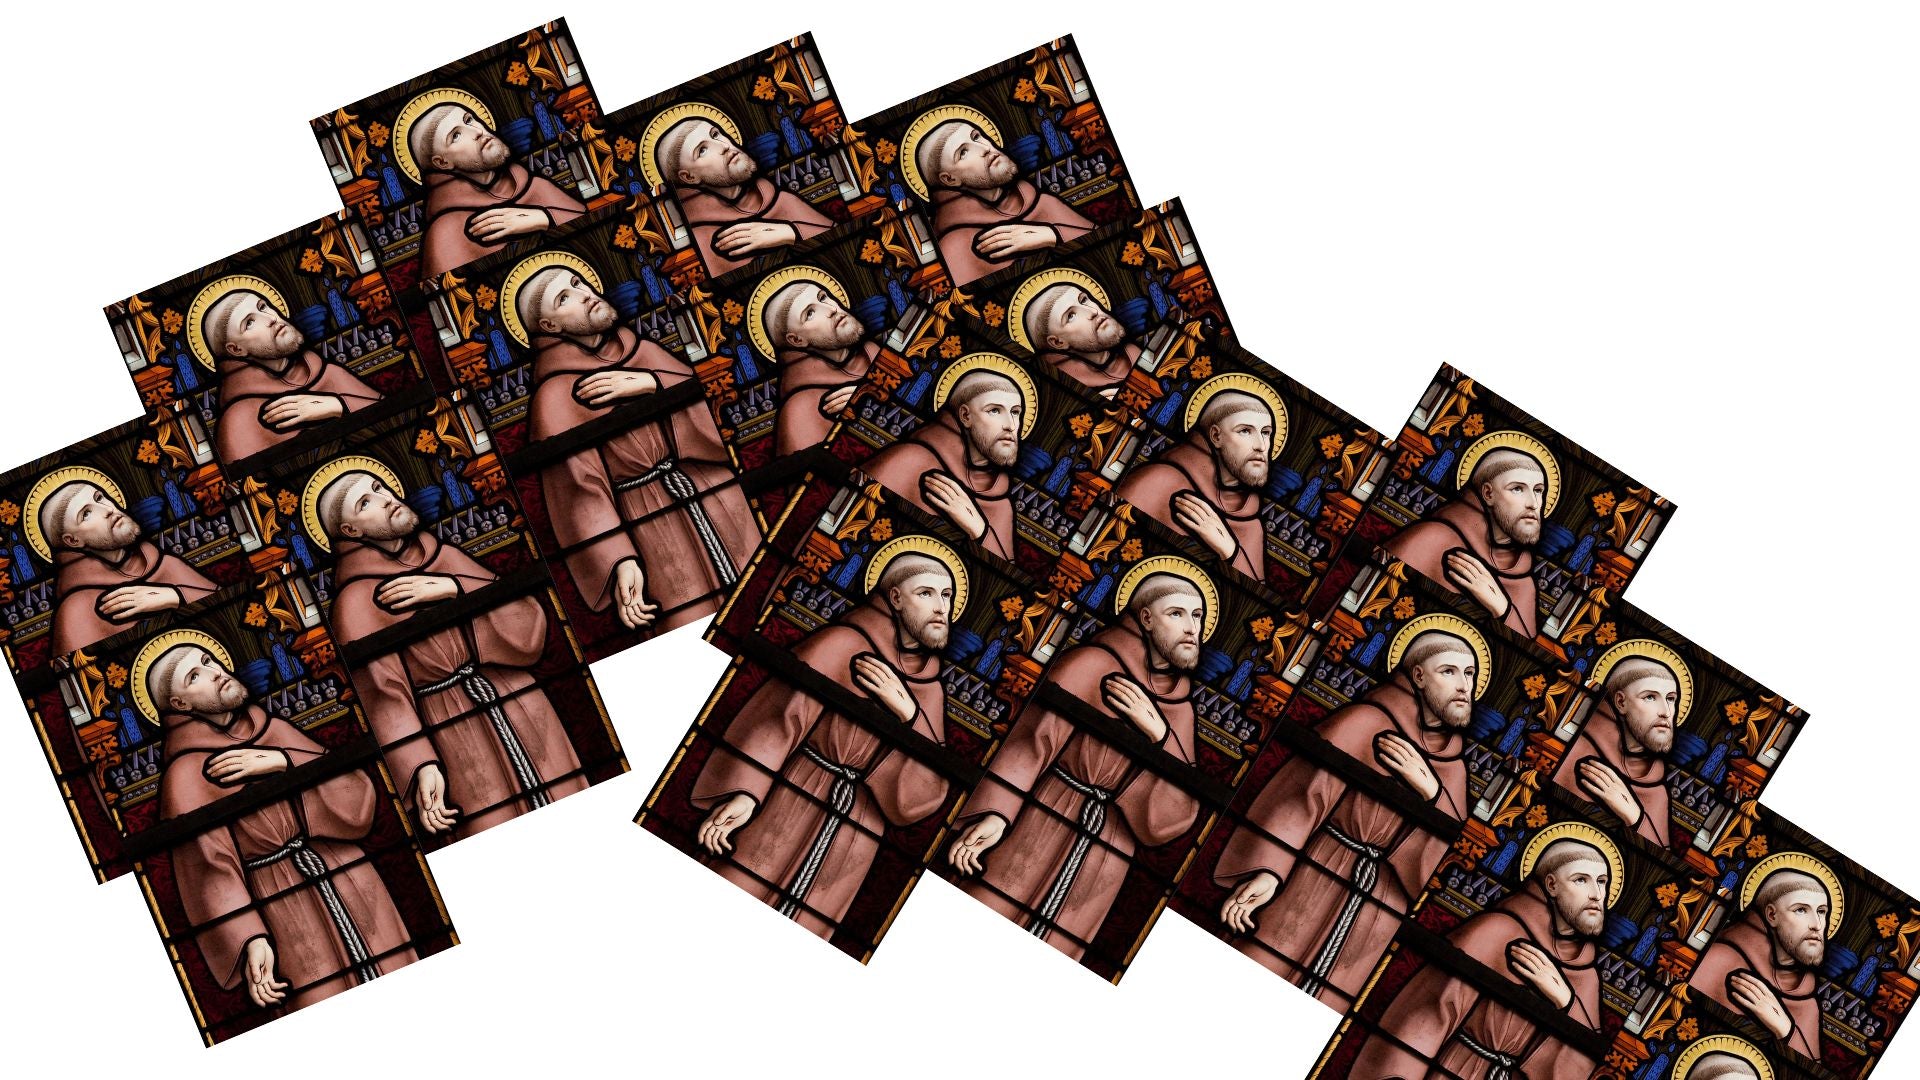 Prayer of Saint Francis of Assisi Prayer Card Packages - Bob and Penny Lord